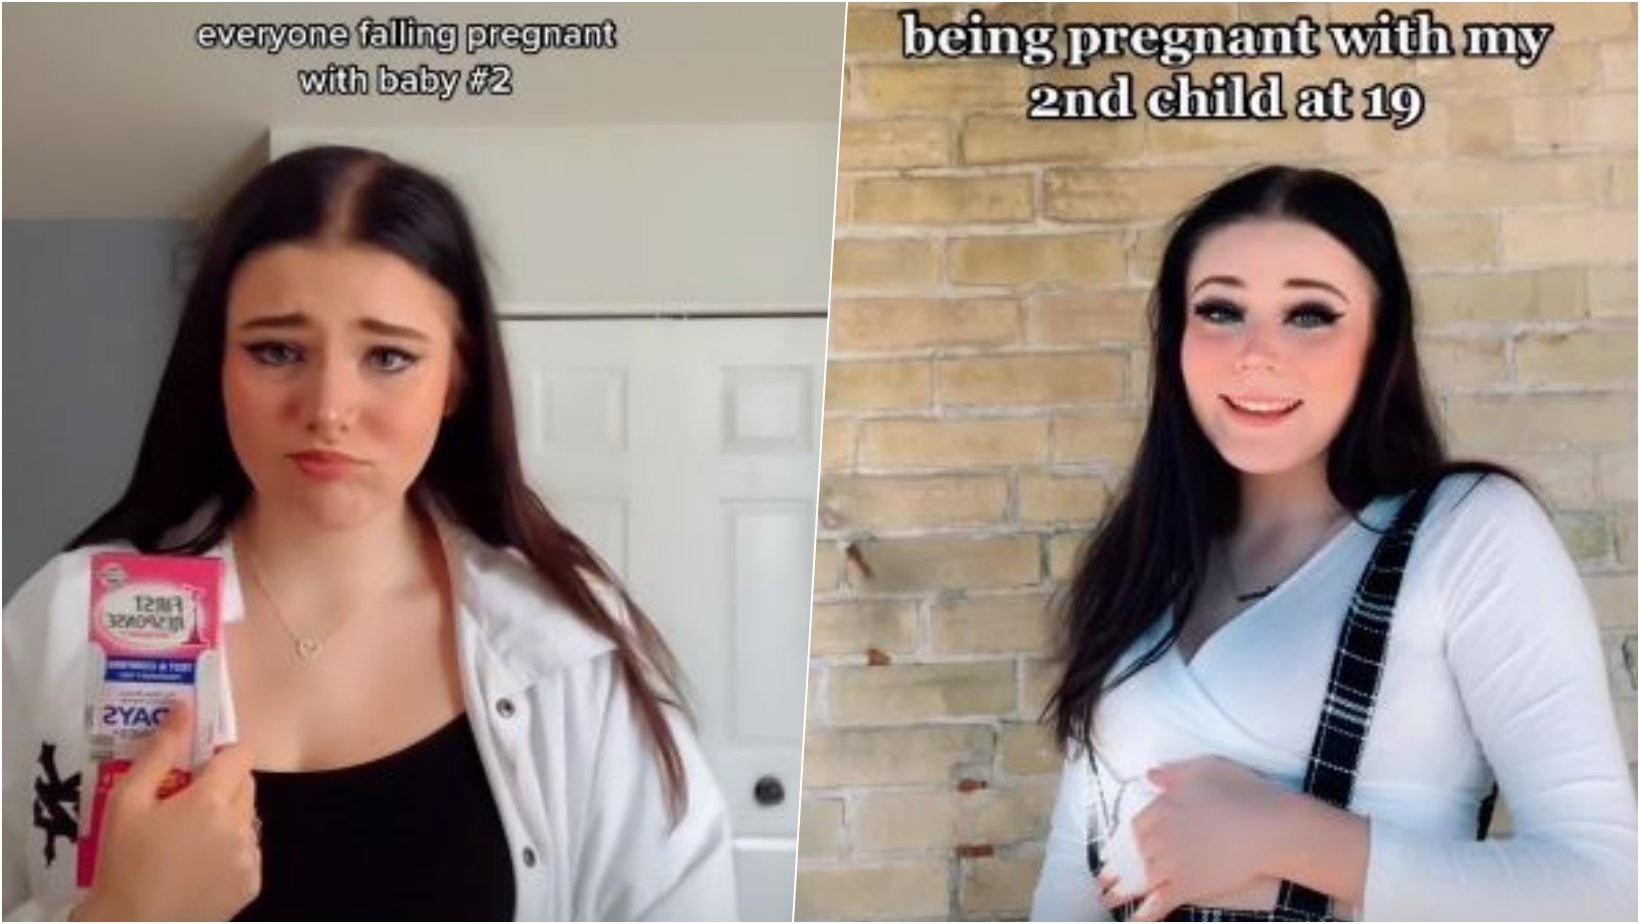 6 facebook cover 11.jpg?resize=412,275 - 19-Year-Old Mom Reveals She Is Pregnant With Her Second Child, But Some Are Not Happy With Her Pregnancy Announcement